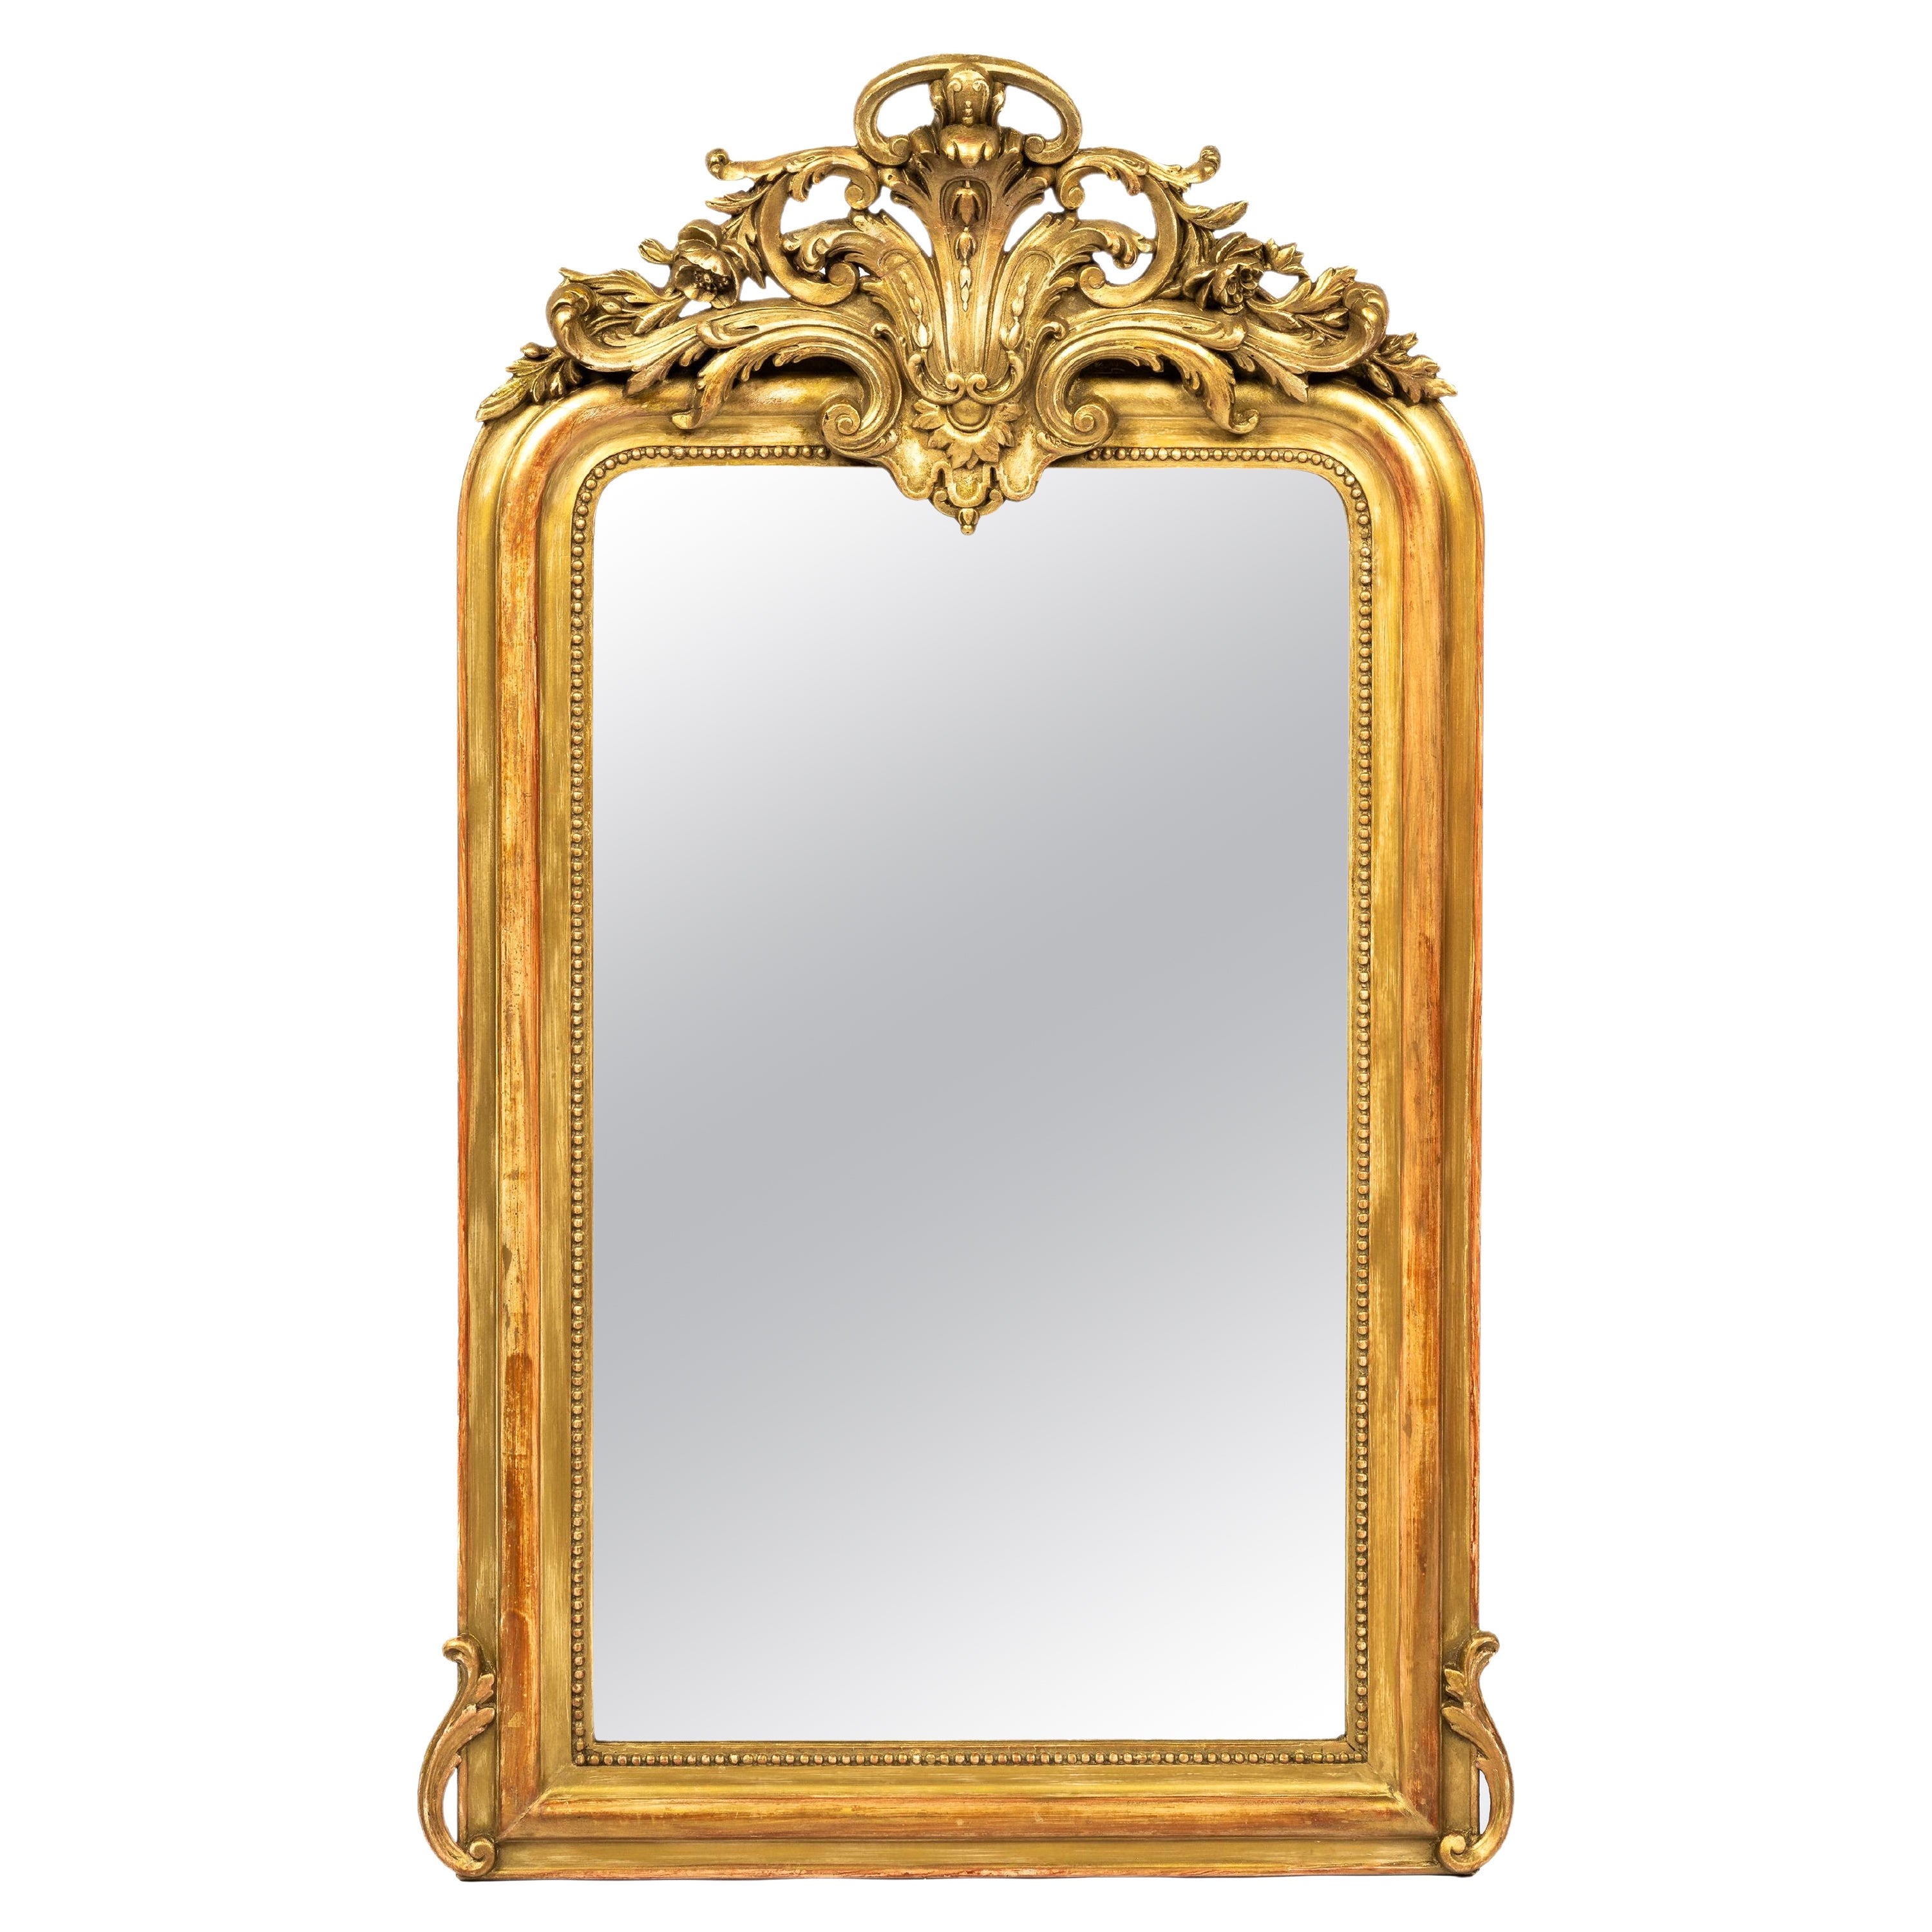 Antique 19th Century French Worn Gold Leaf Gilt Louis Philippe Mirror with Crest For Sale